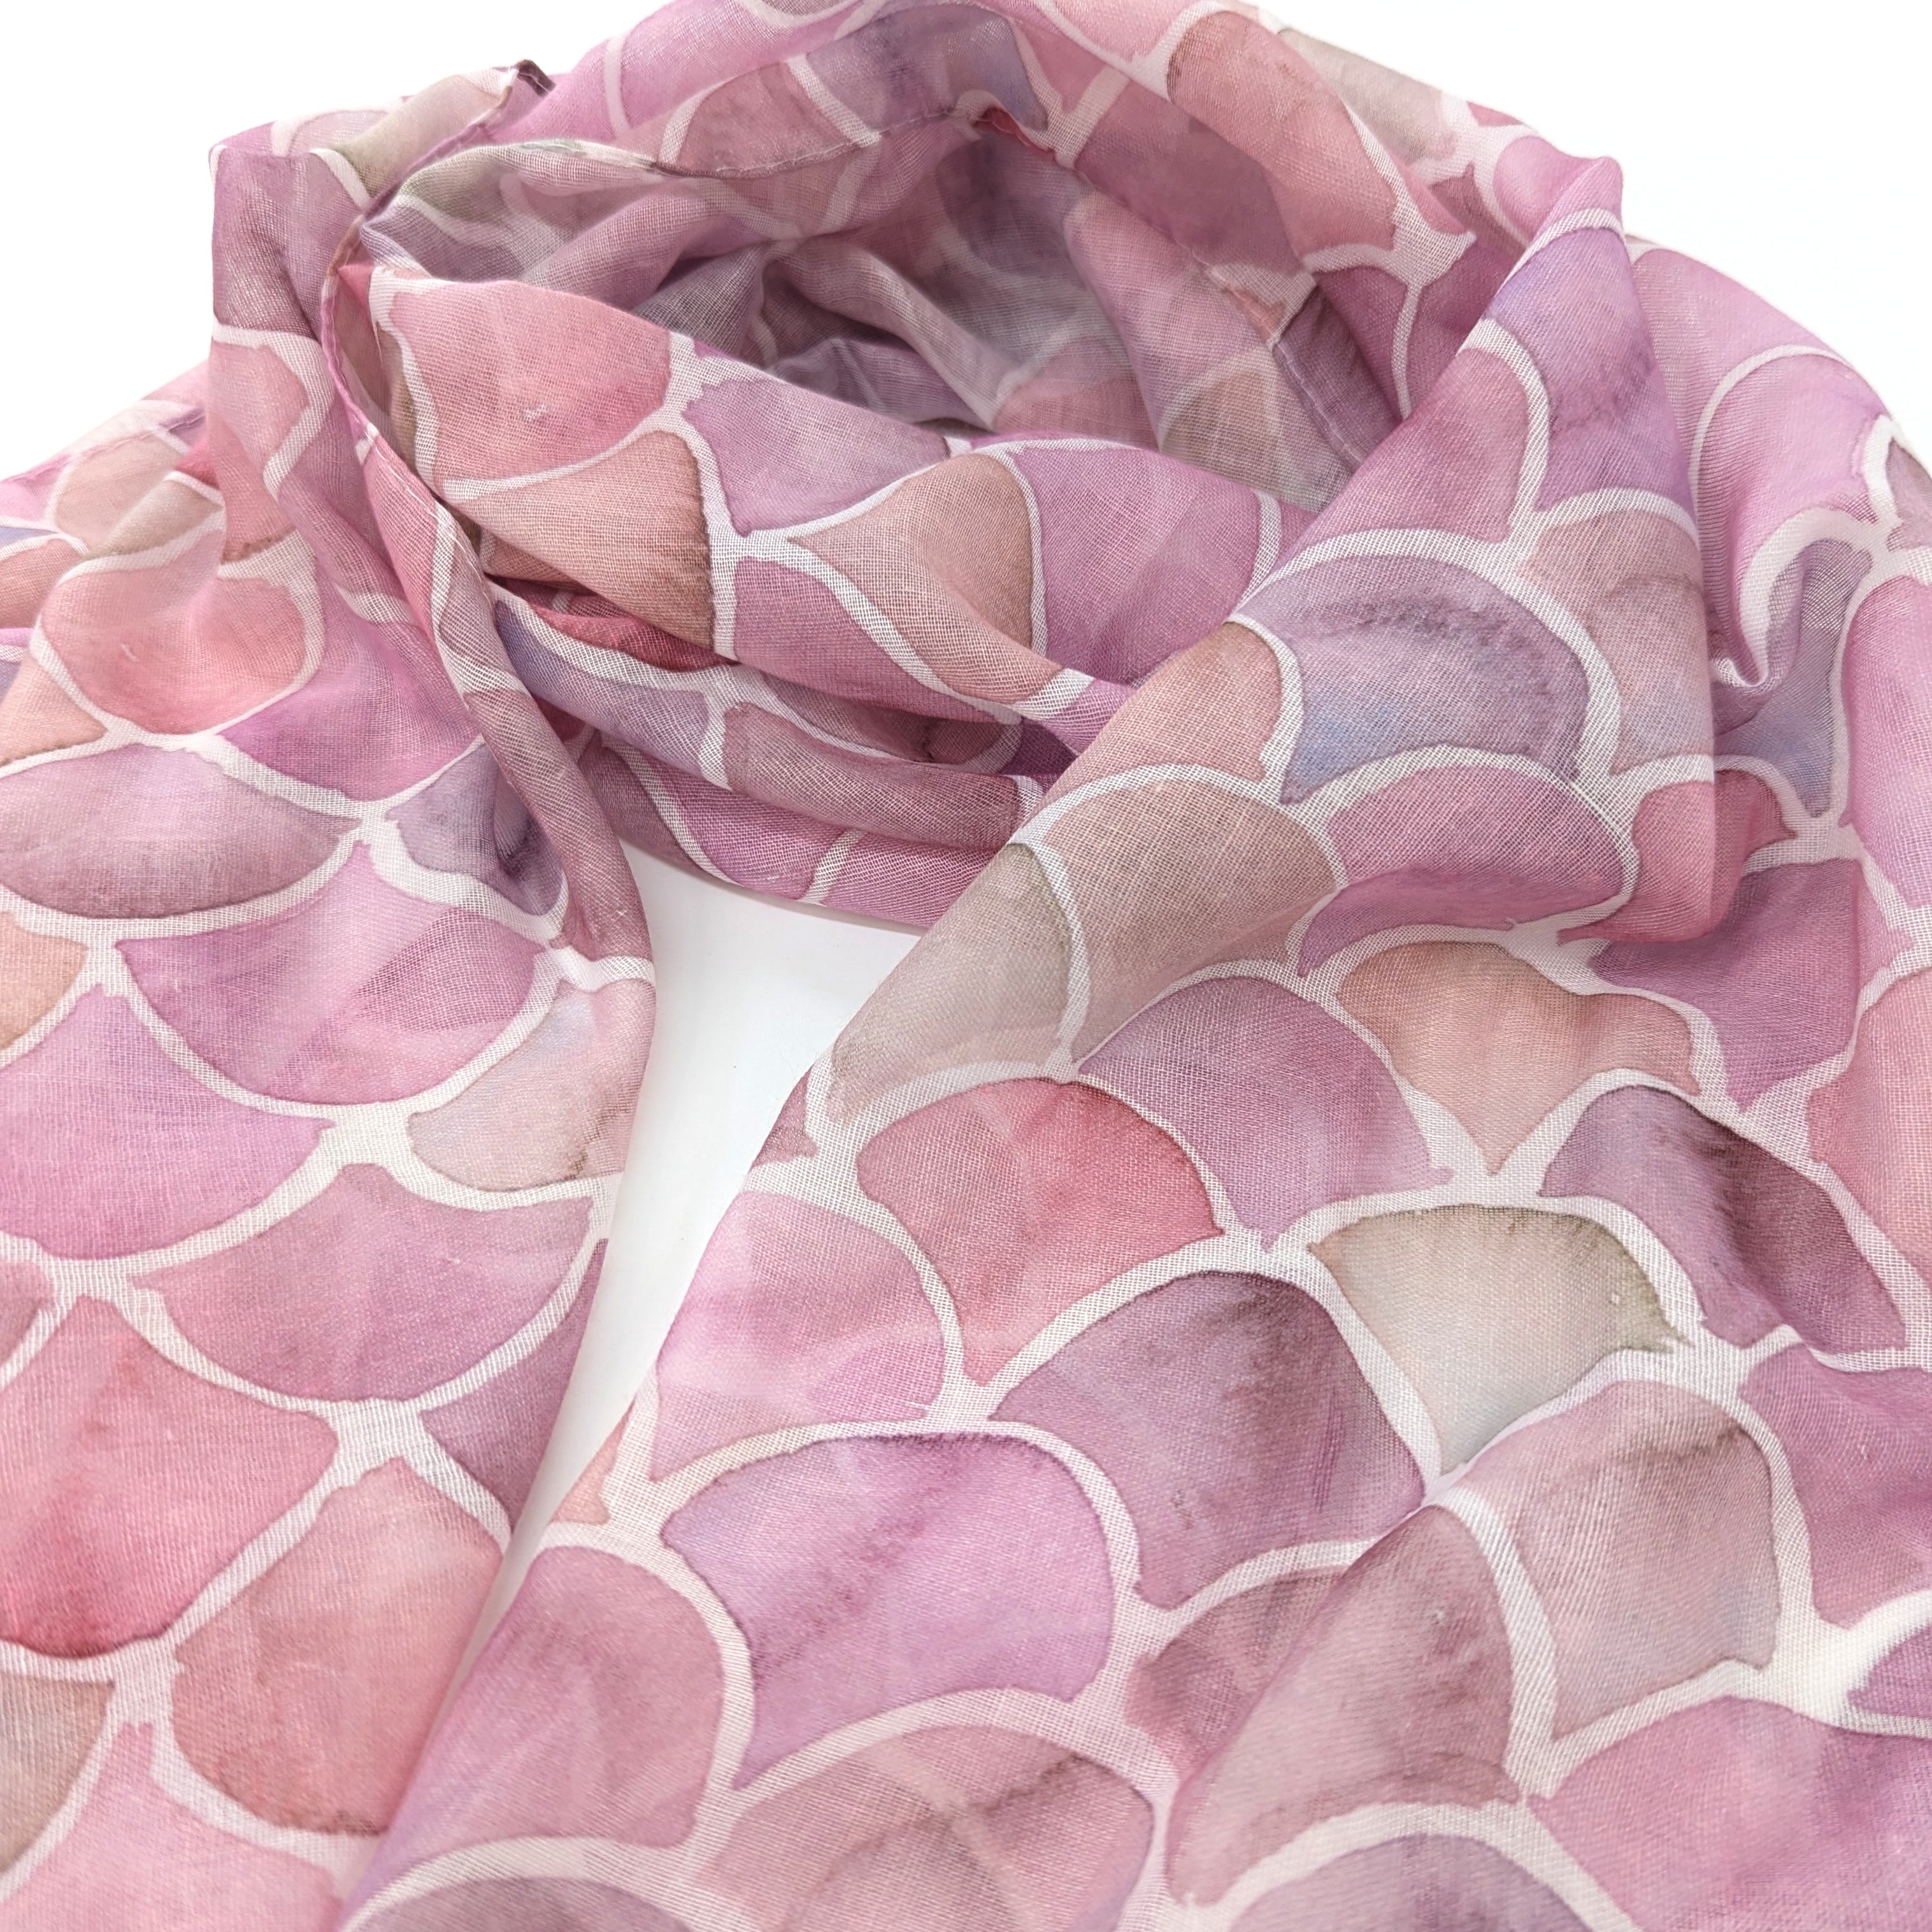 Watercolour Style Scalloped Mermaid Scarf